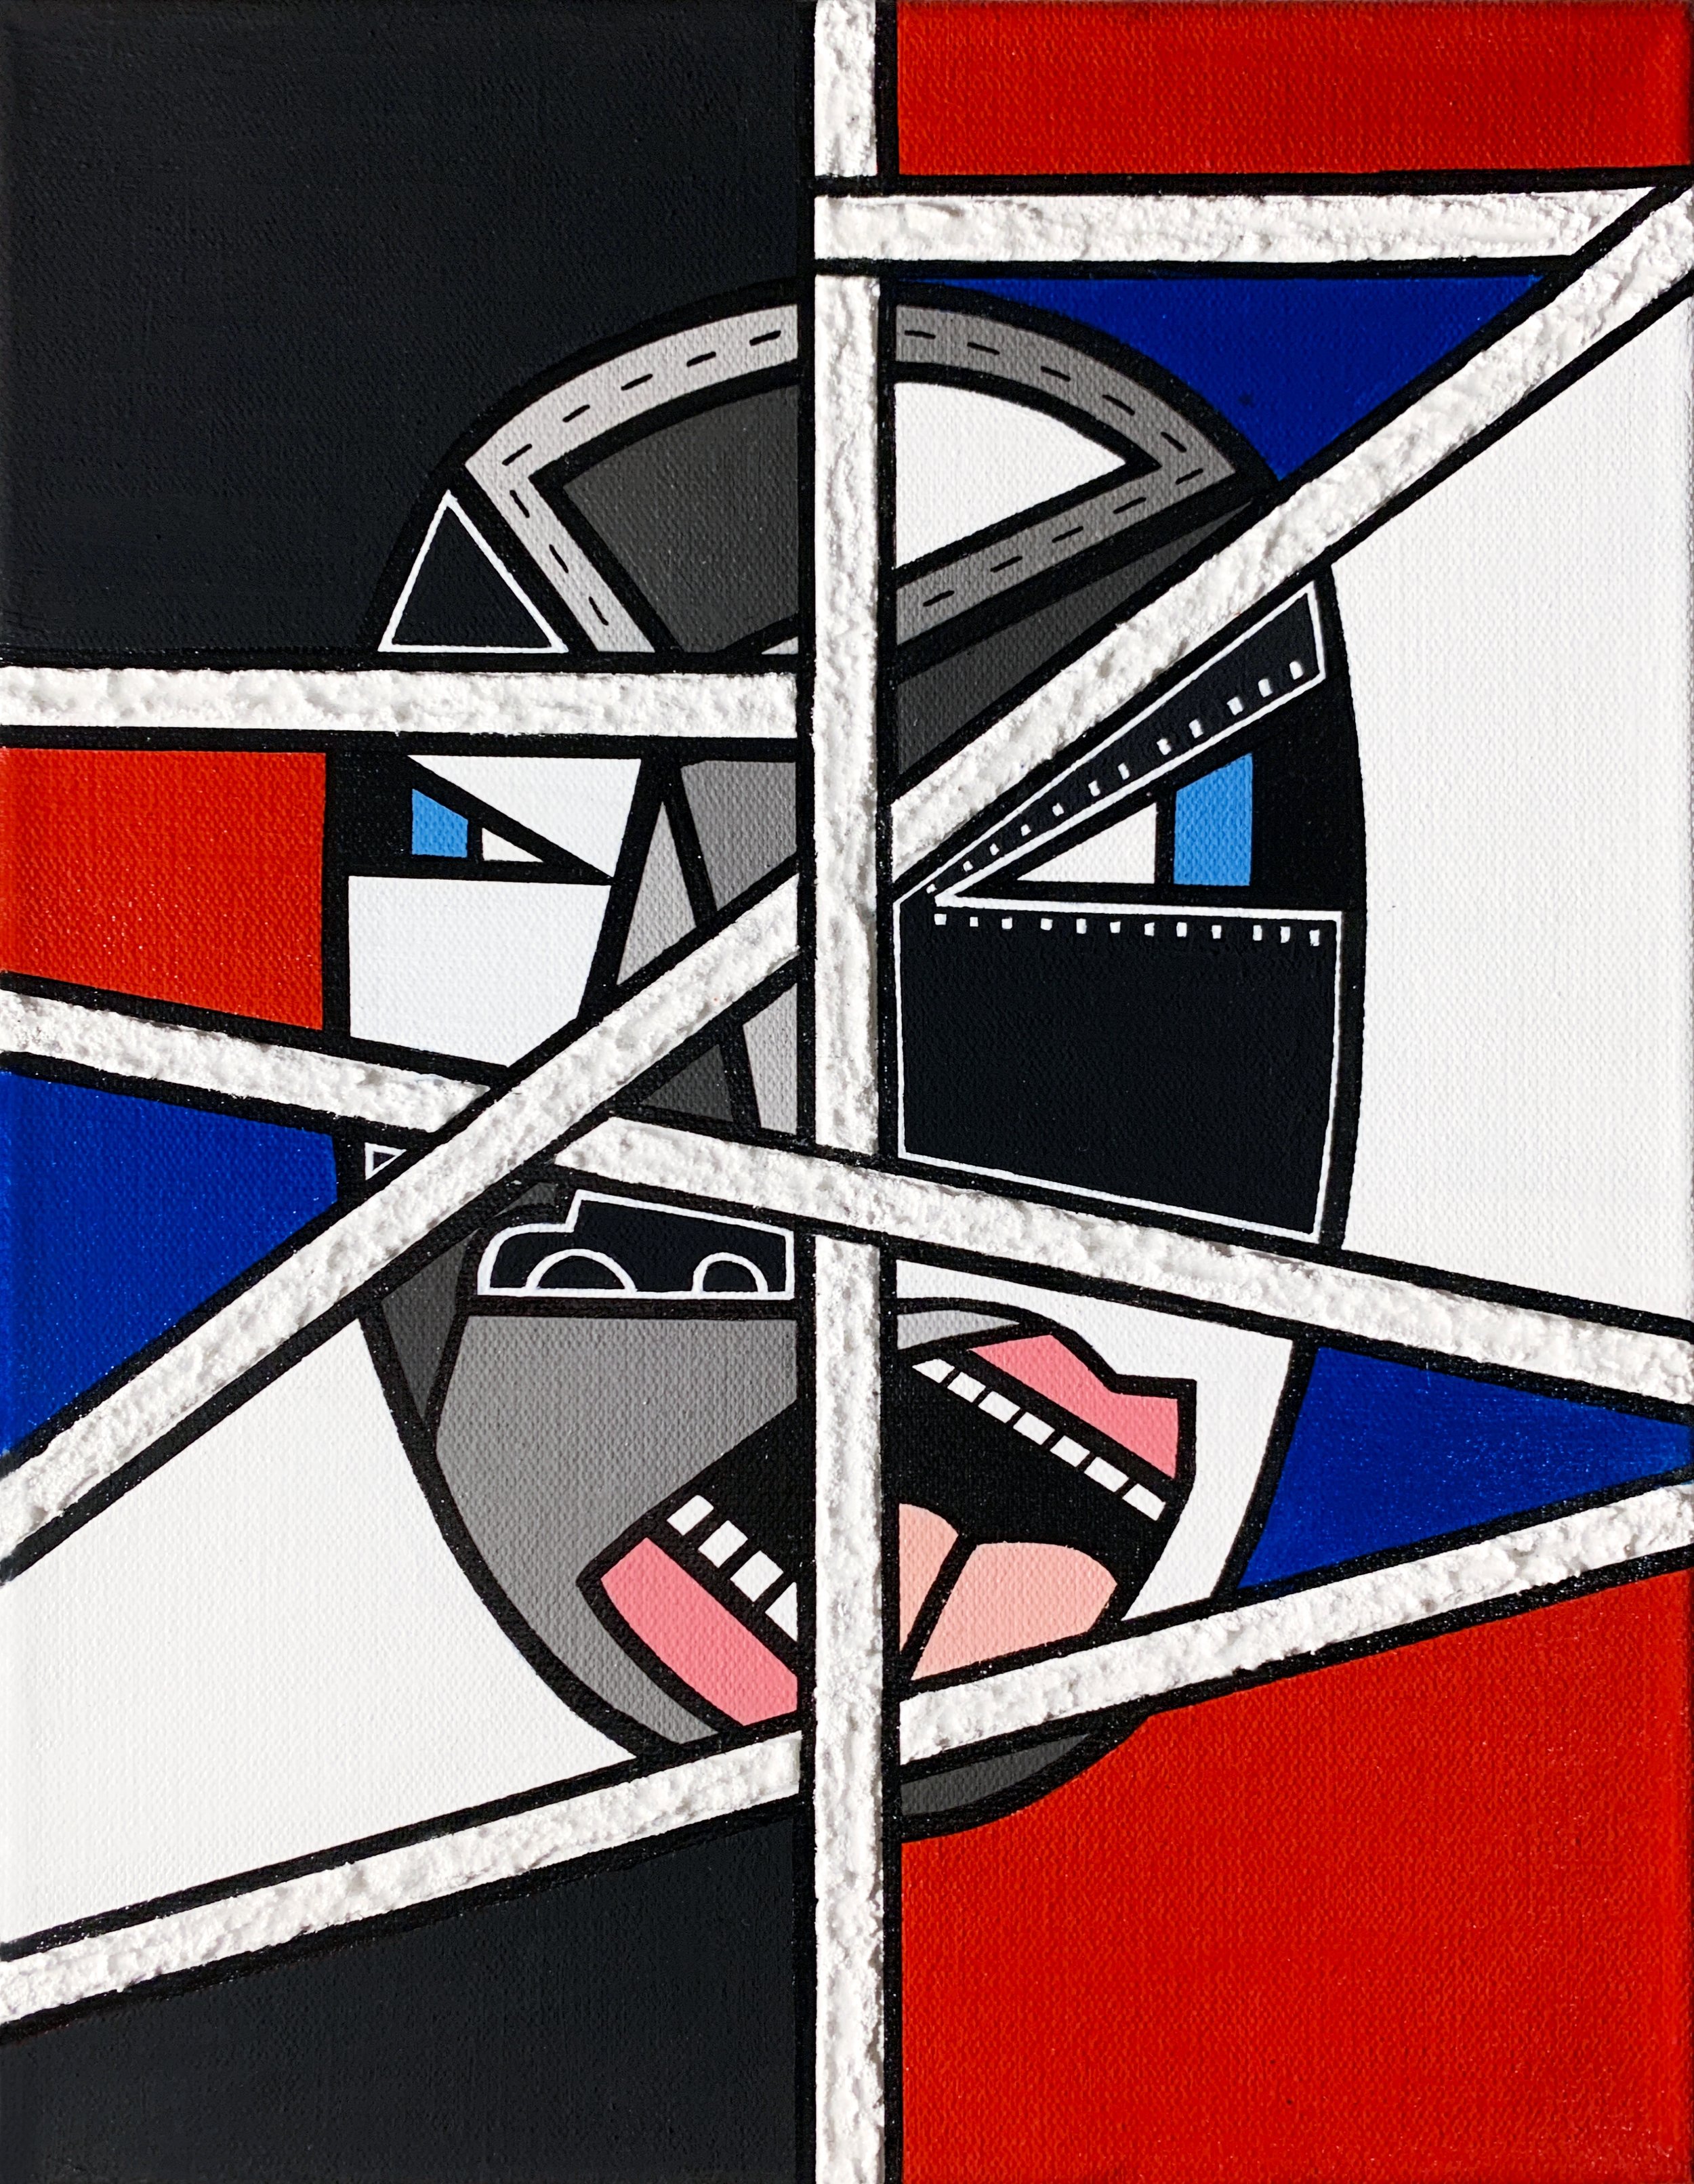 Van Halen, 2022, acrylic, ink pen and pumice on canvas, 14 x 11 inches